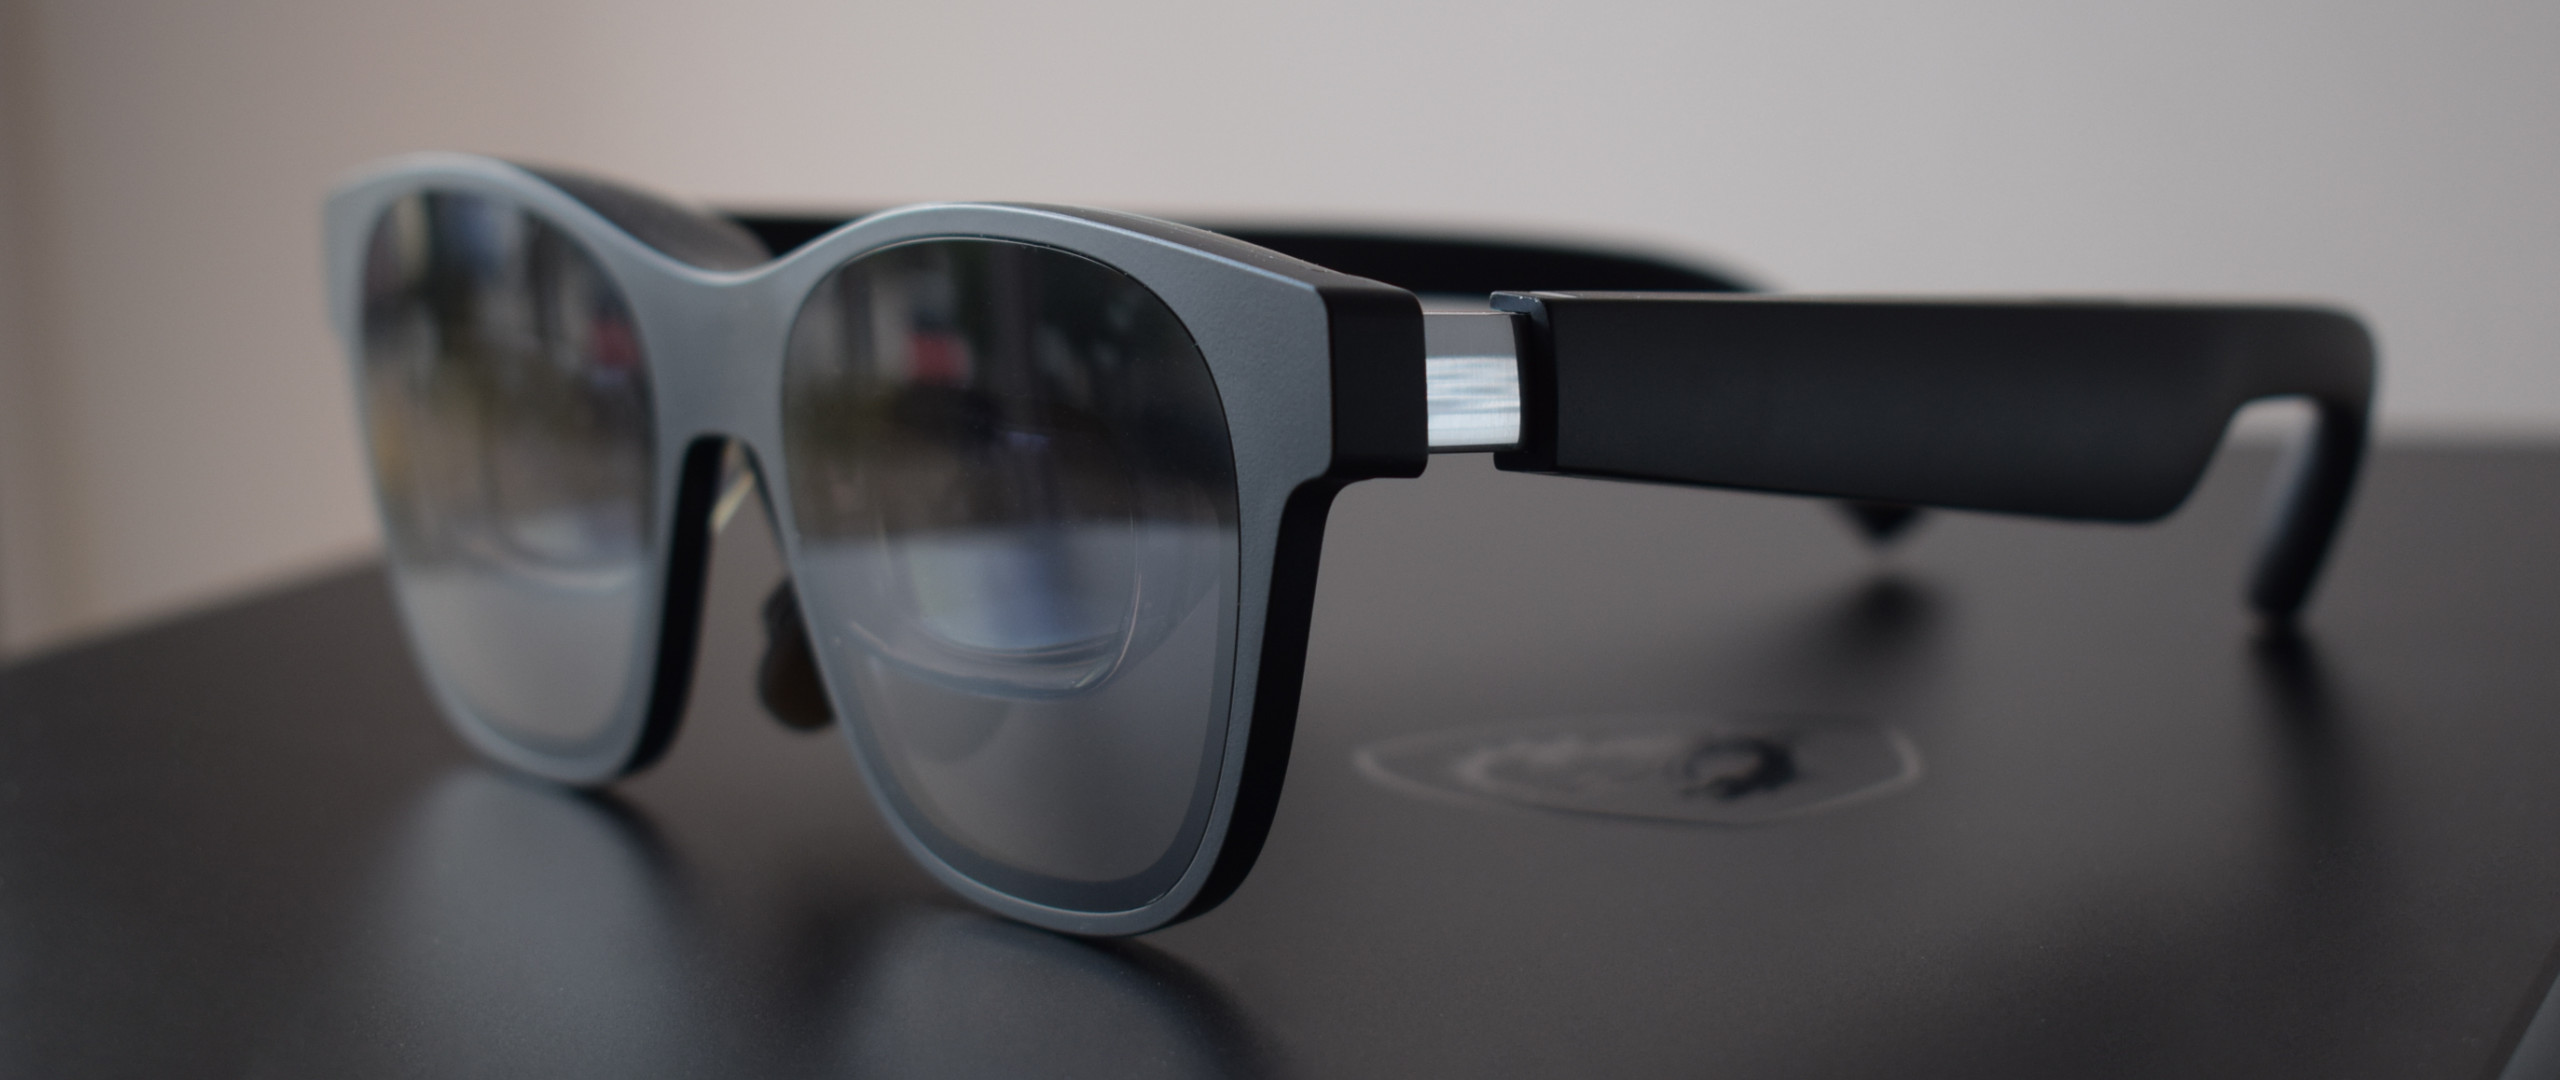 XREAL Air AR glasses review: Cool and futuristic, but too many problems to  justify the price